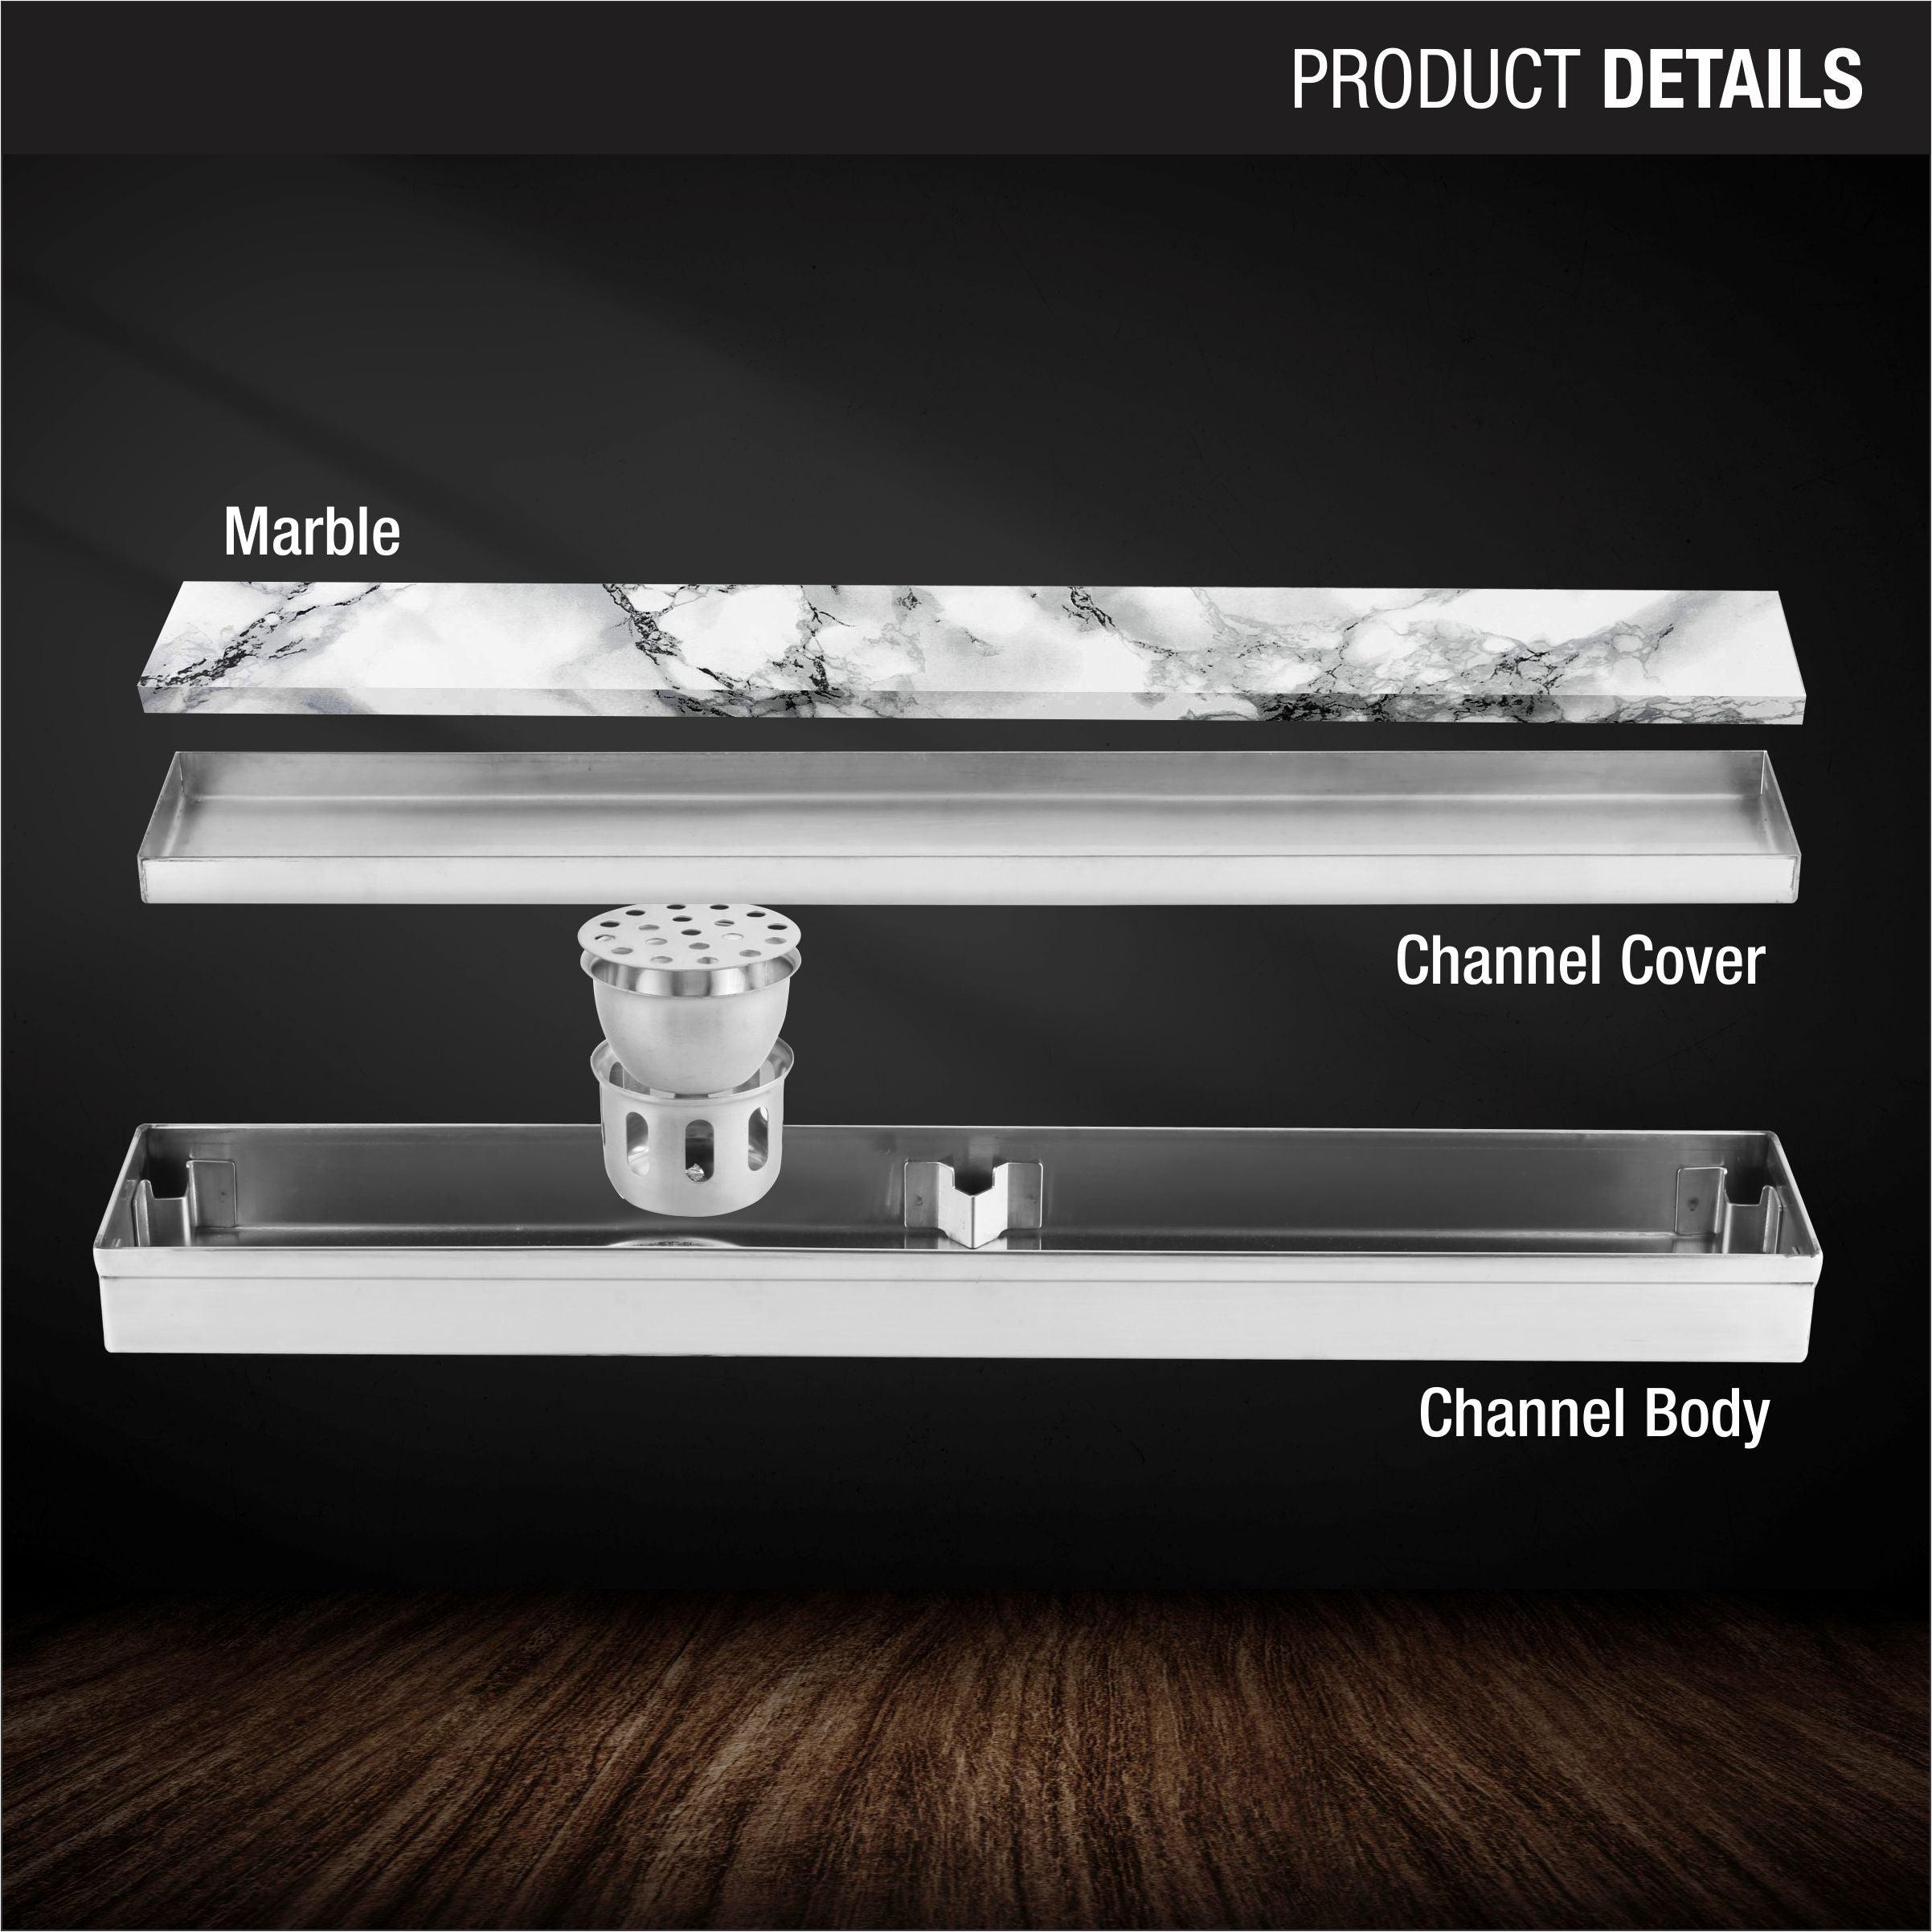 Marble Insert Shower Drain Channel (48 x 5 Inches) product details